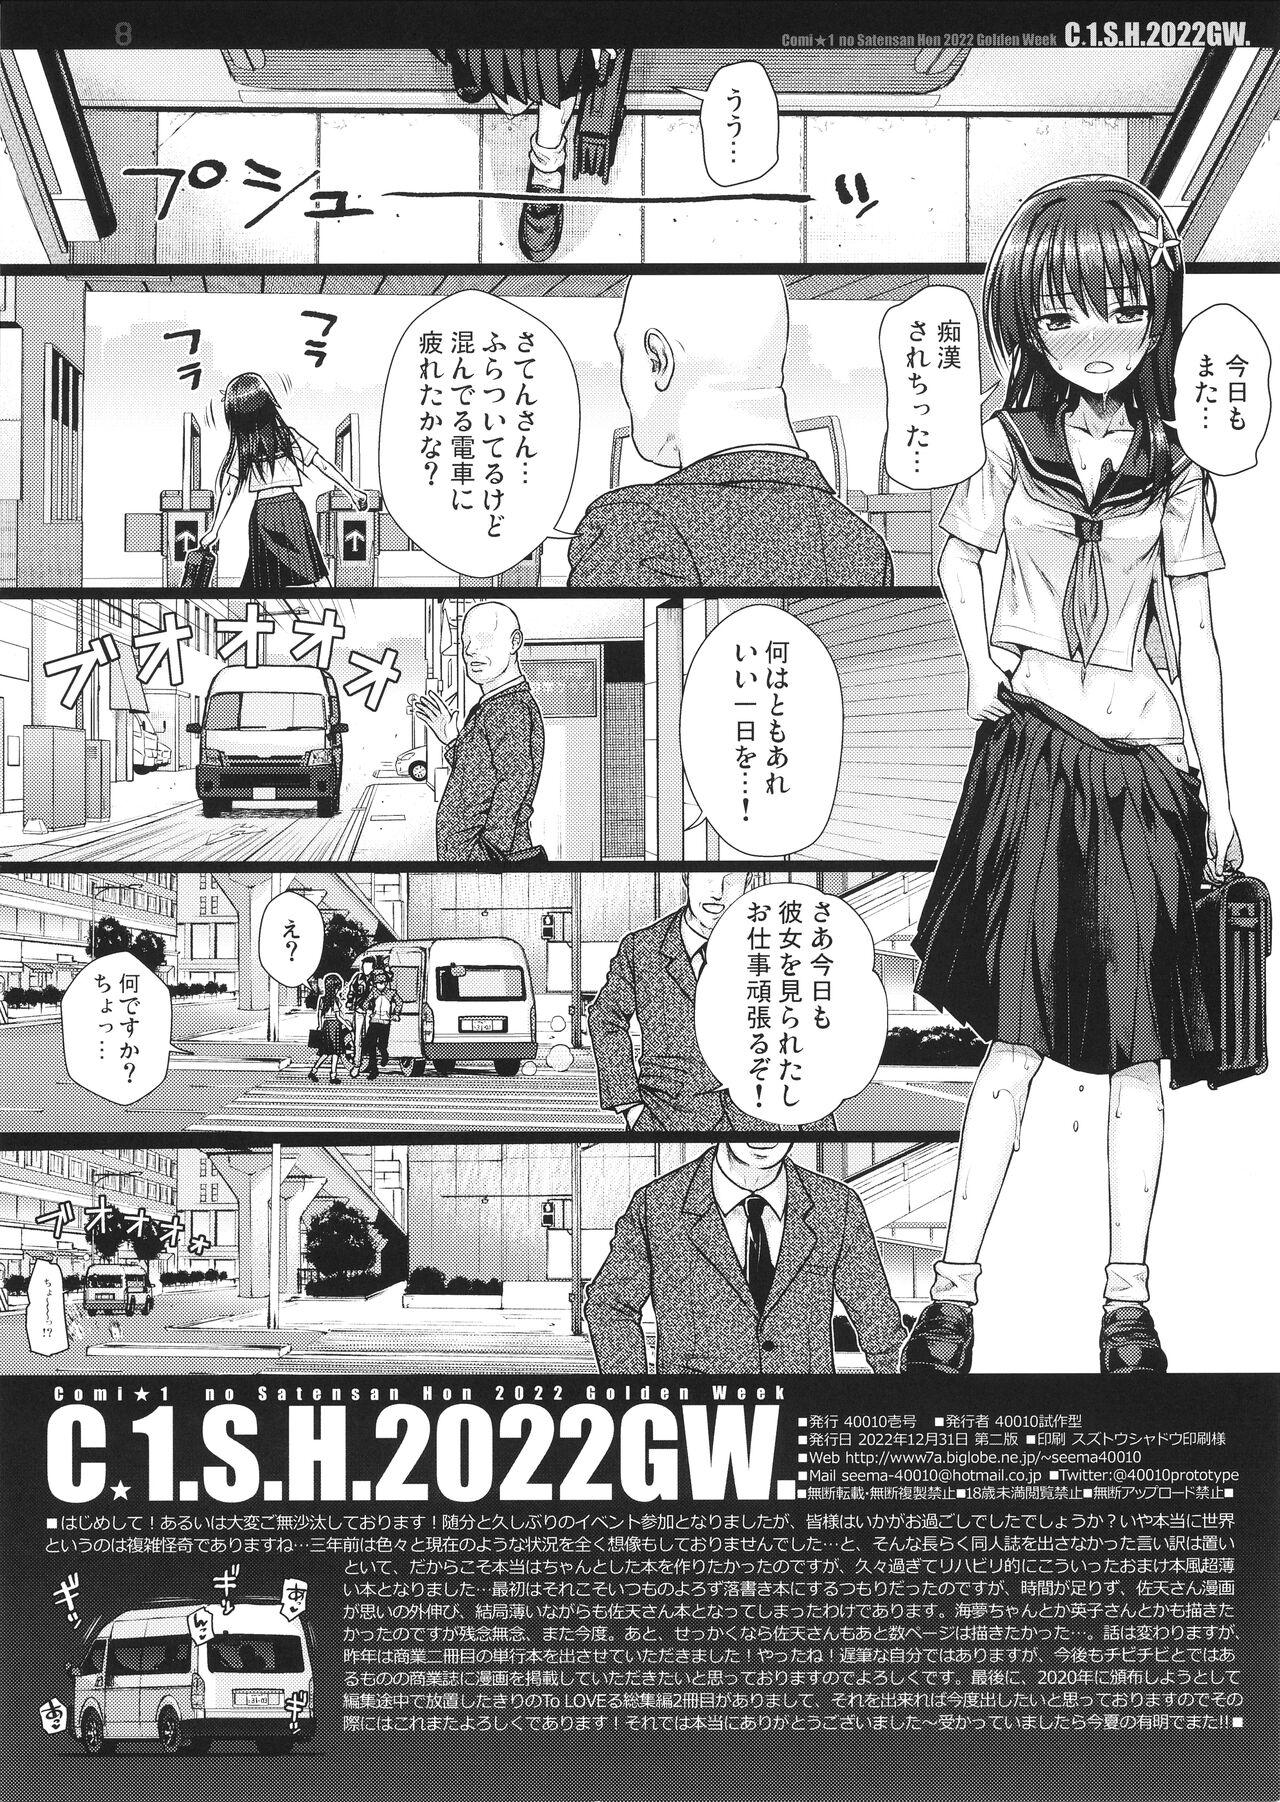 Fit C☆1.S.H.2022GW. - Toaru project Anal - Page 8